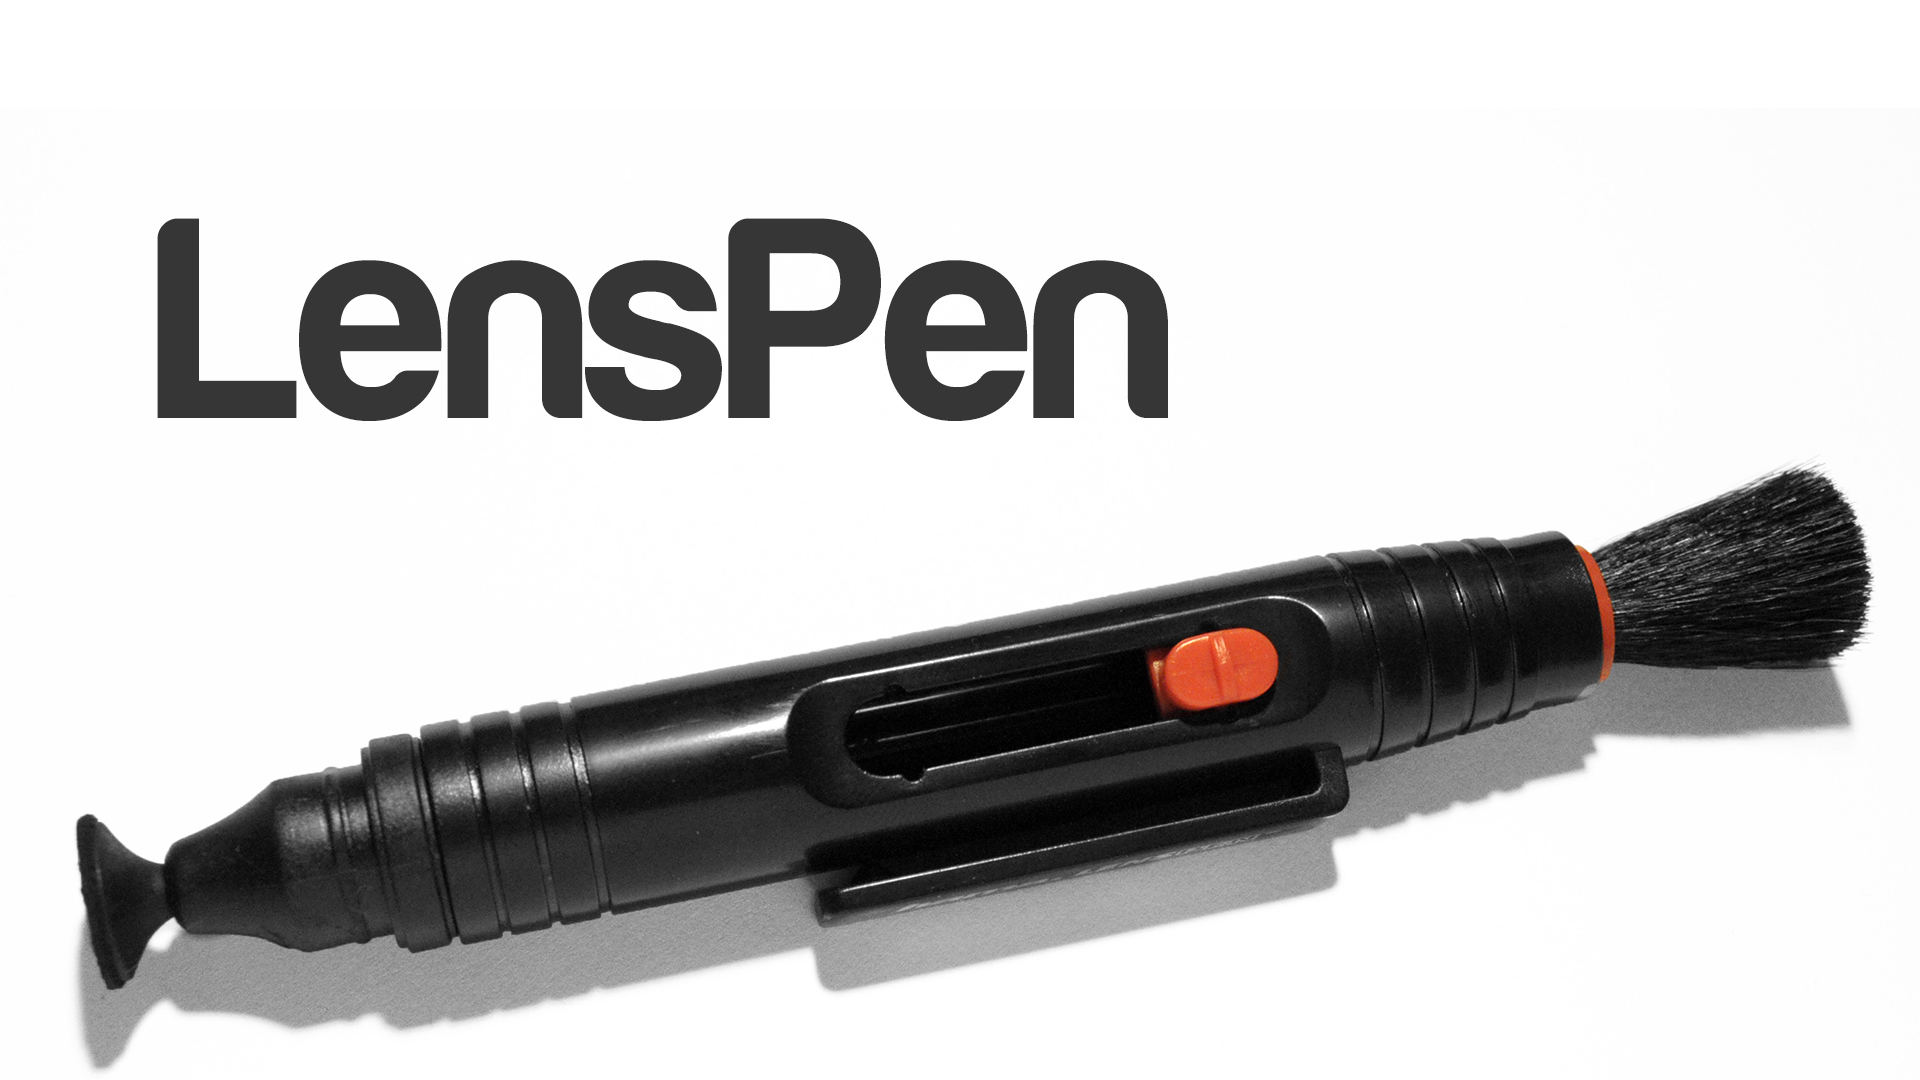 LensPen Cleaning System [REVIEW]